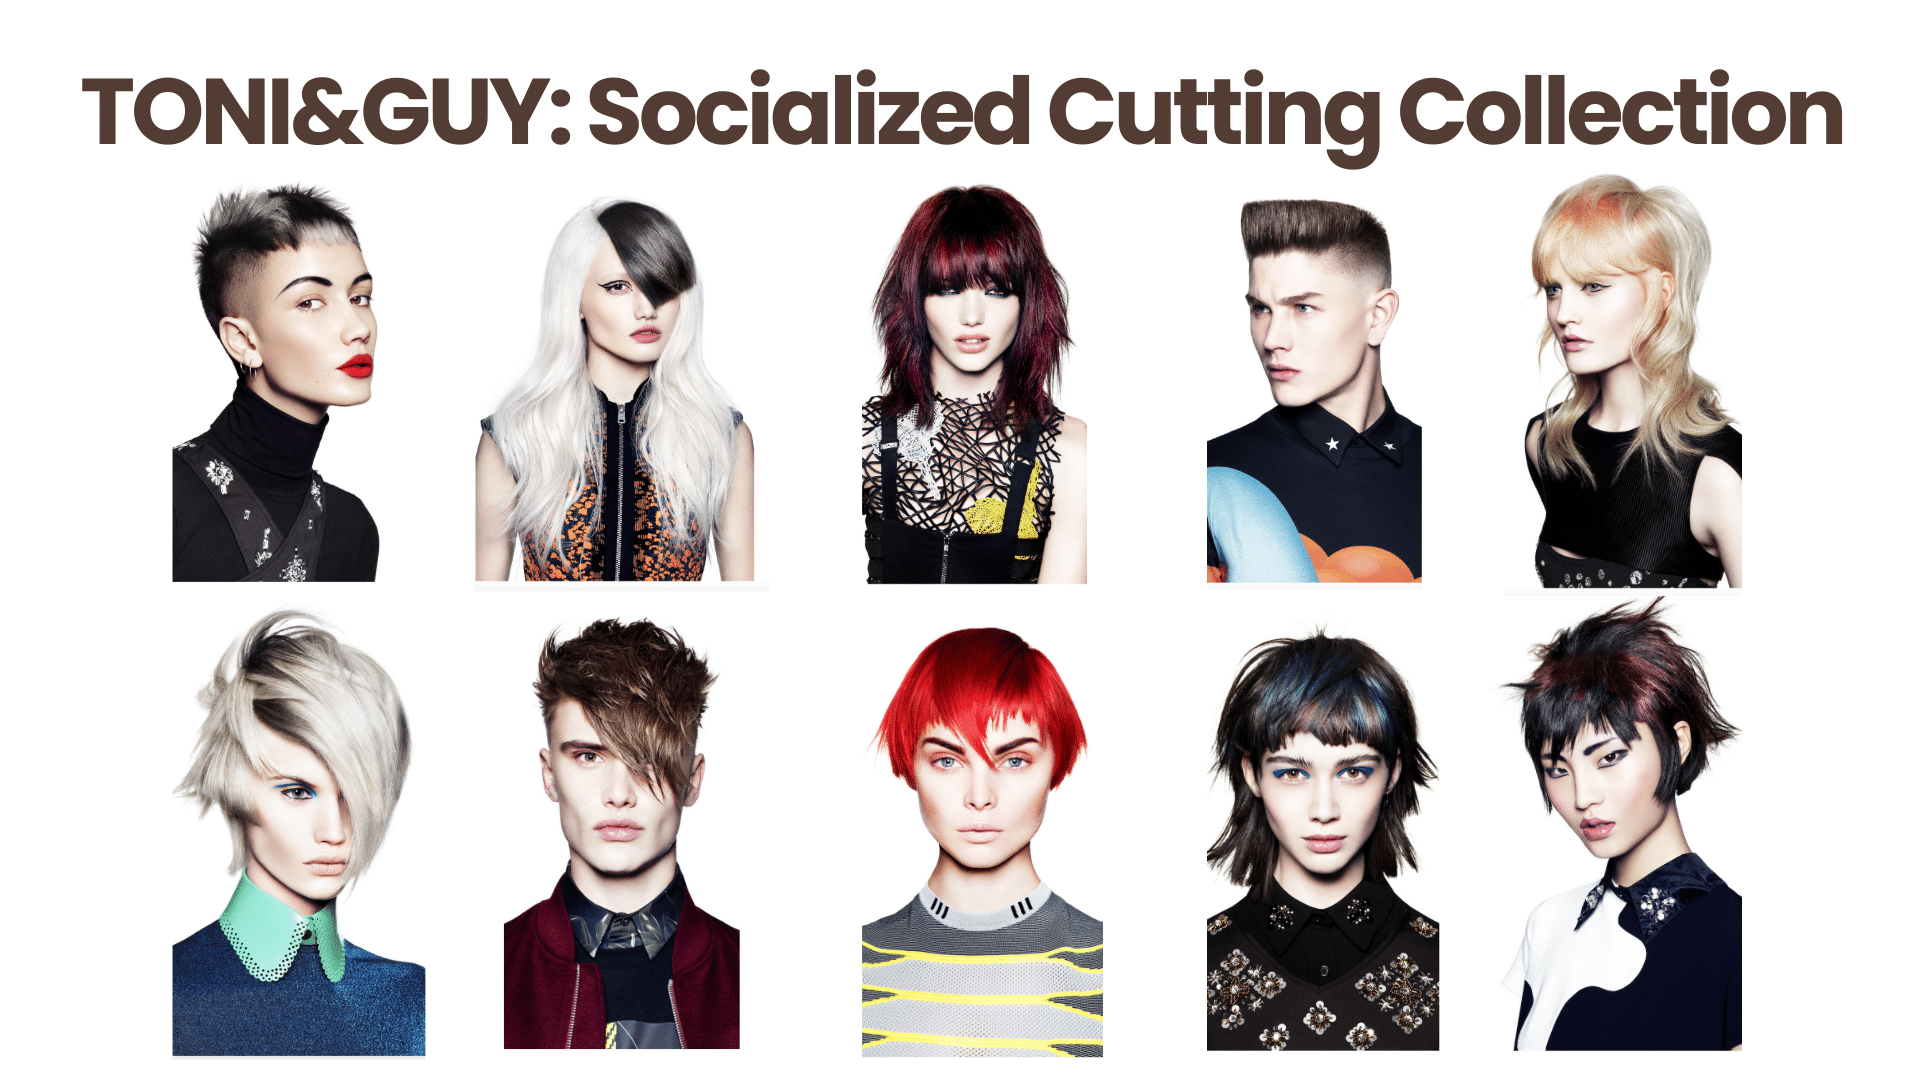 TONI&GUY: Socialized Cutting Collection